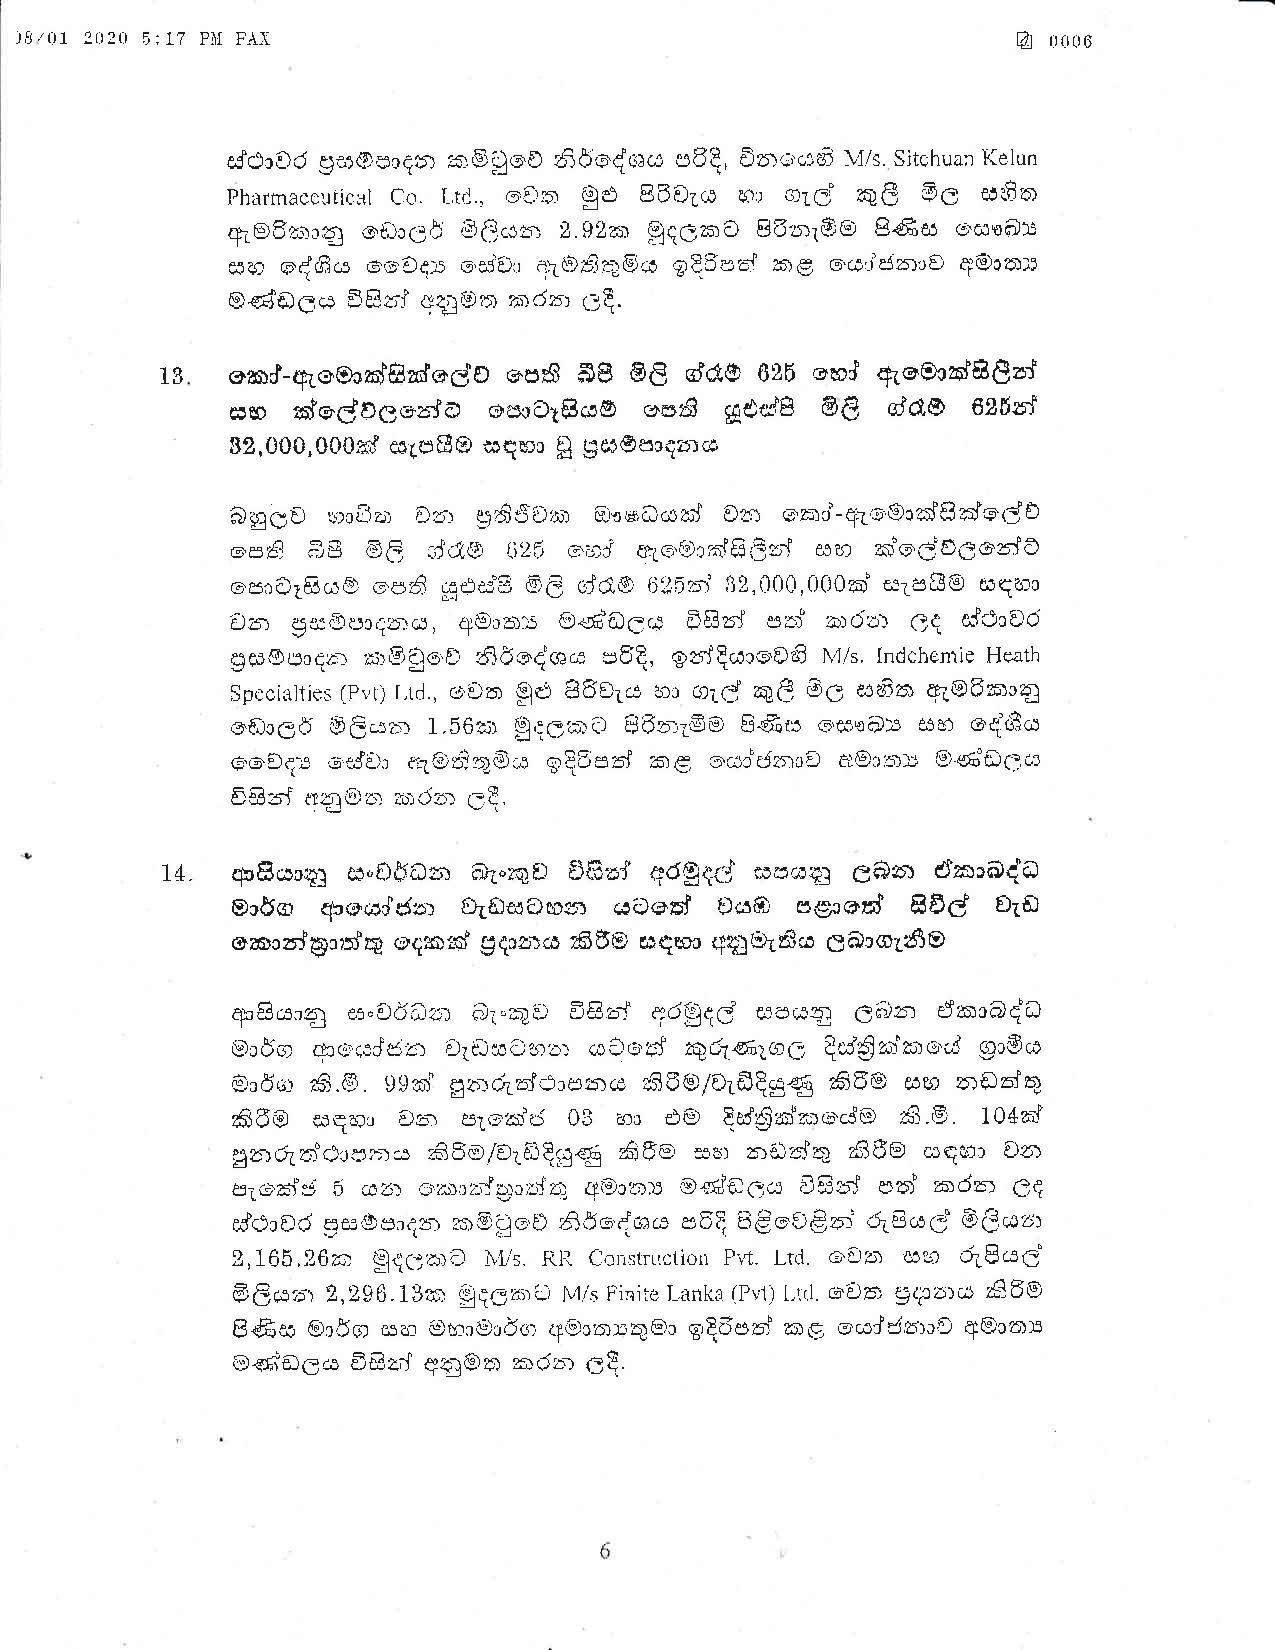 Cabinet Decision on 08.01.2020 page 006